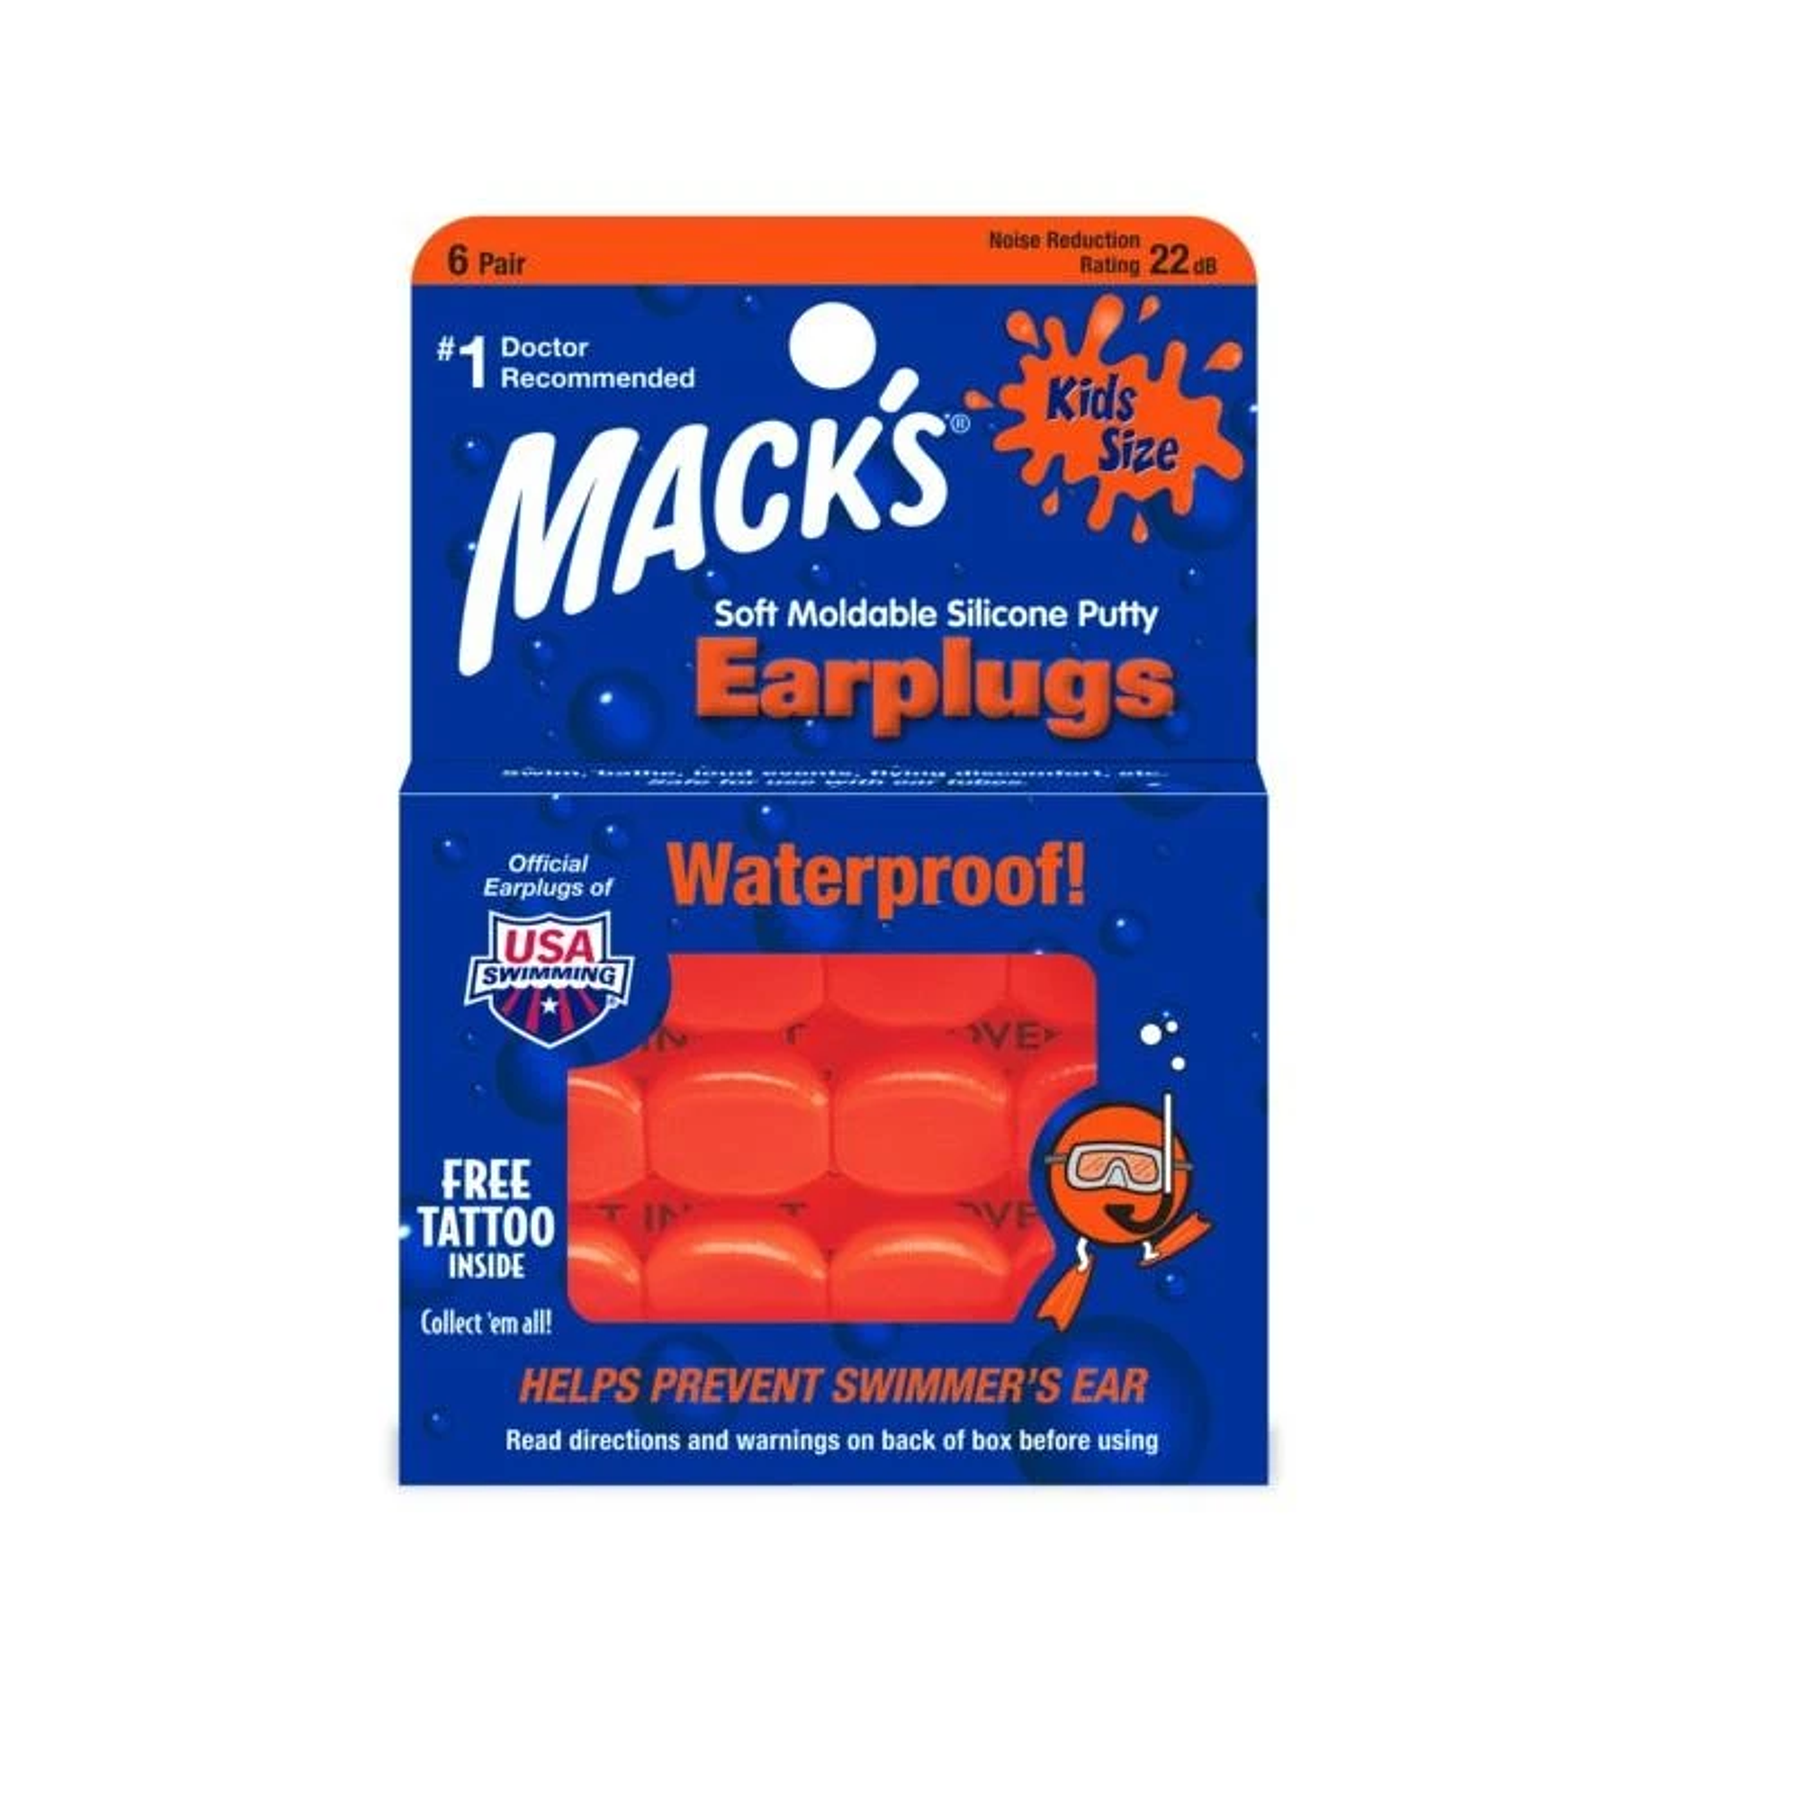 Tapones Mack´s Earplug SOFT MOLDABLE SILICON